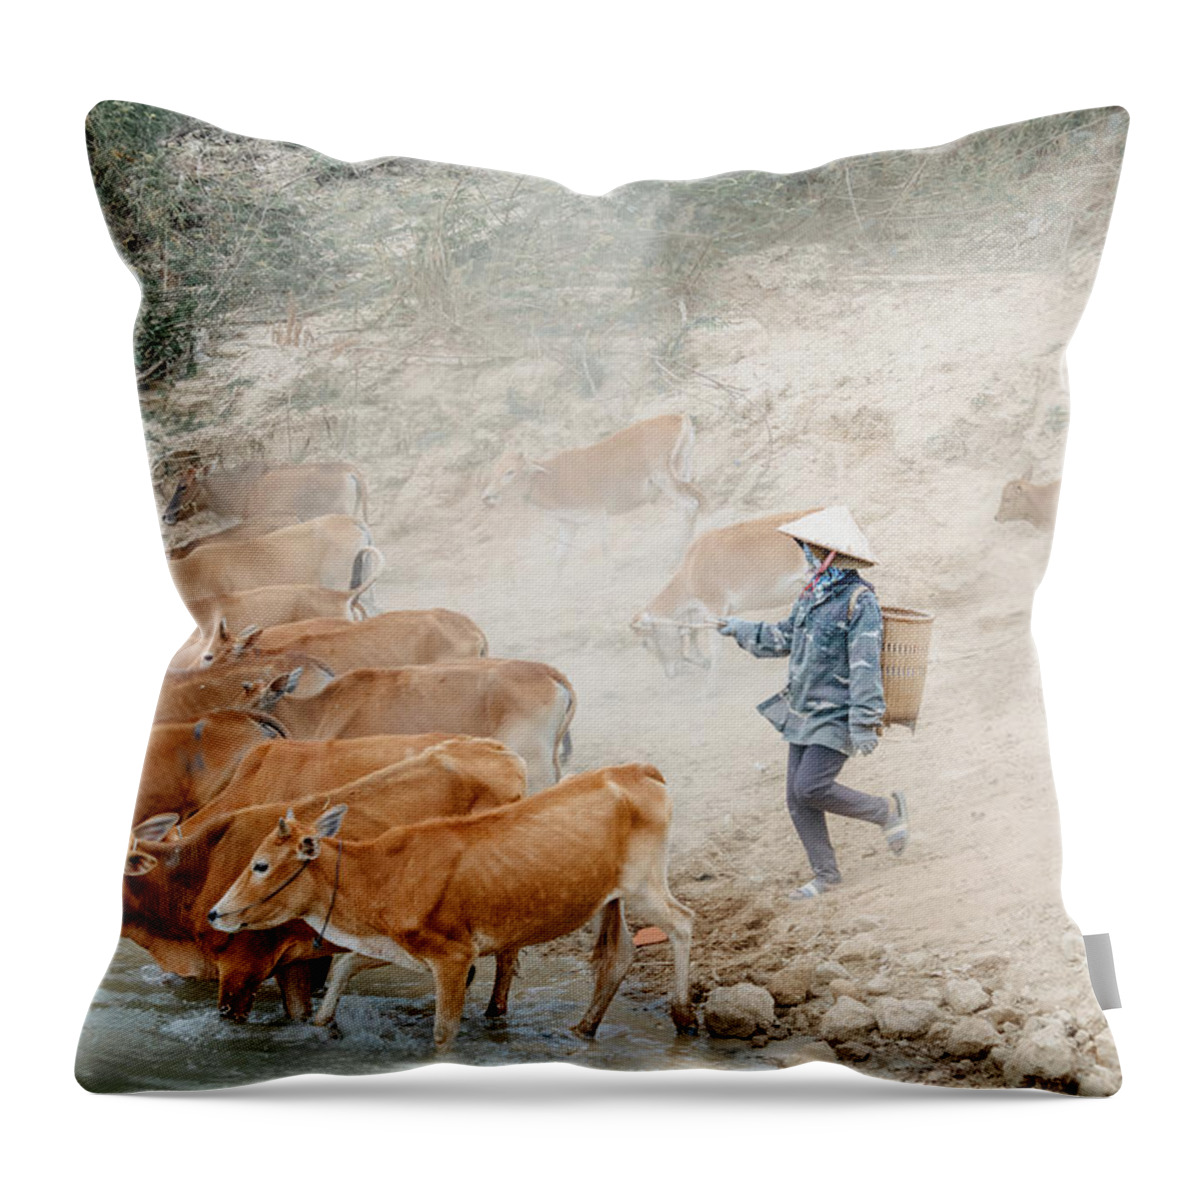 Awesome Throw Pillow featuring the photograph Come Back Center Highland by Khanh Bui Phu